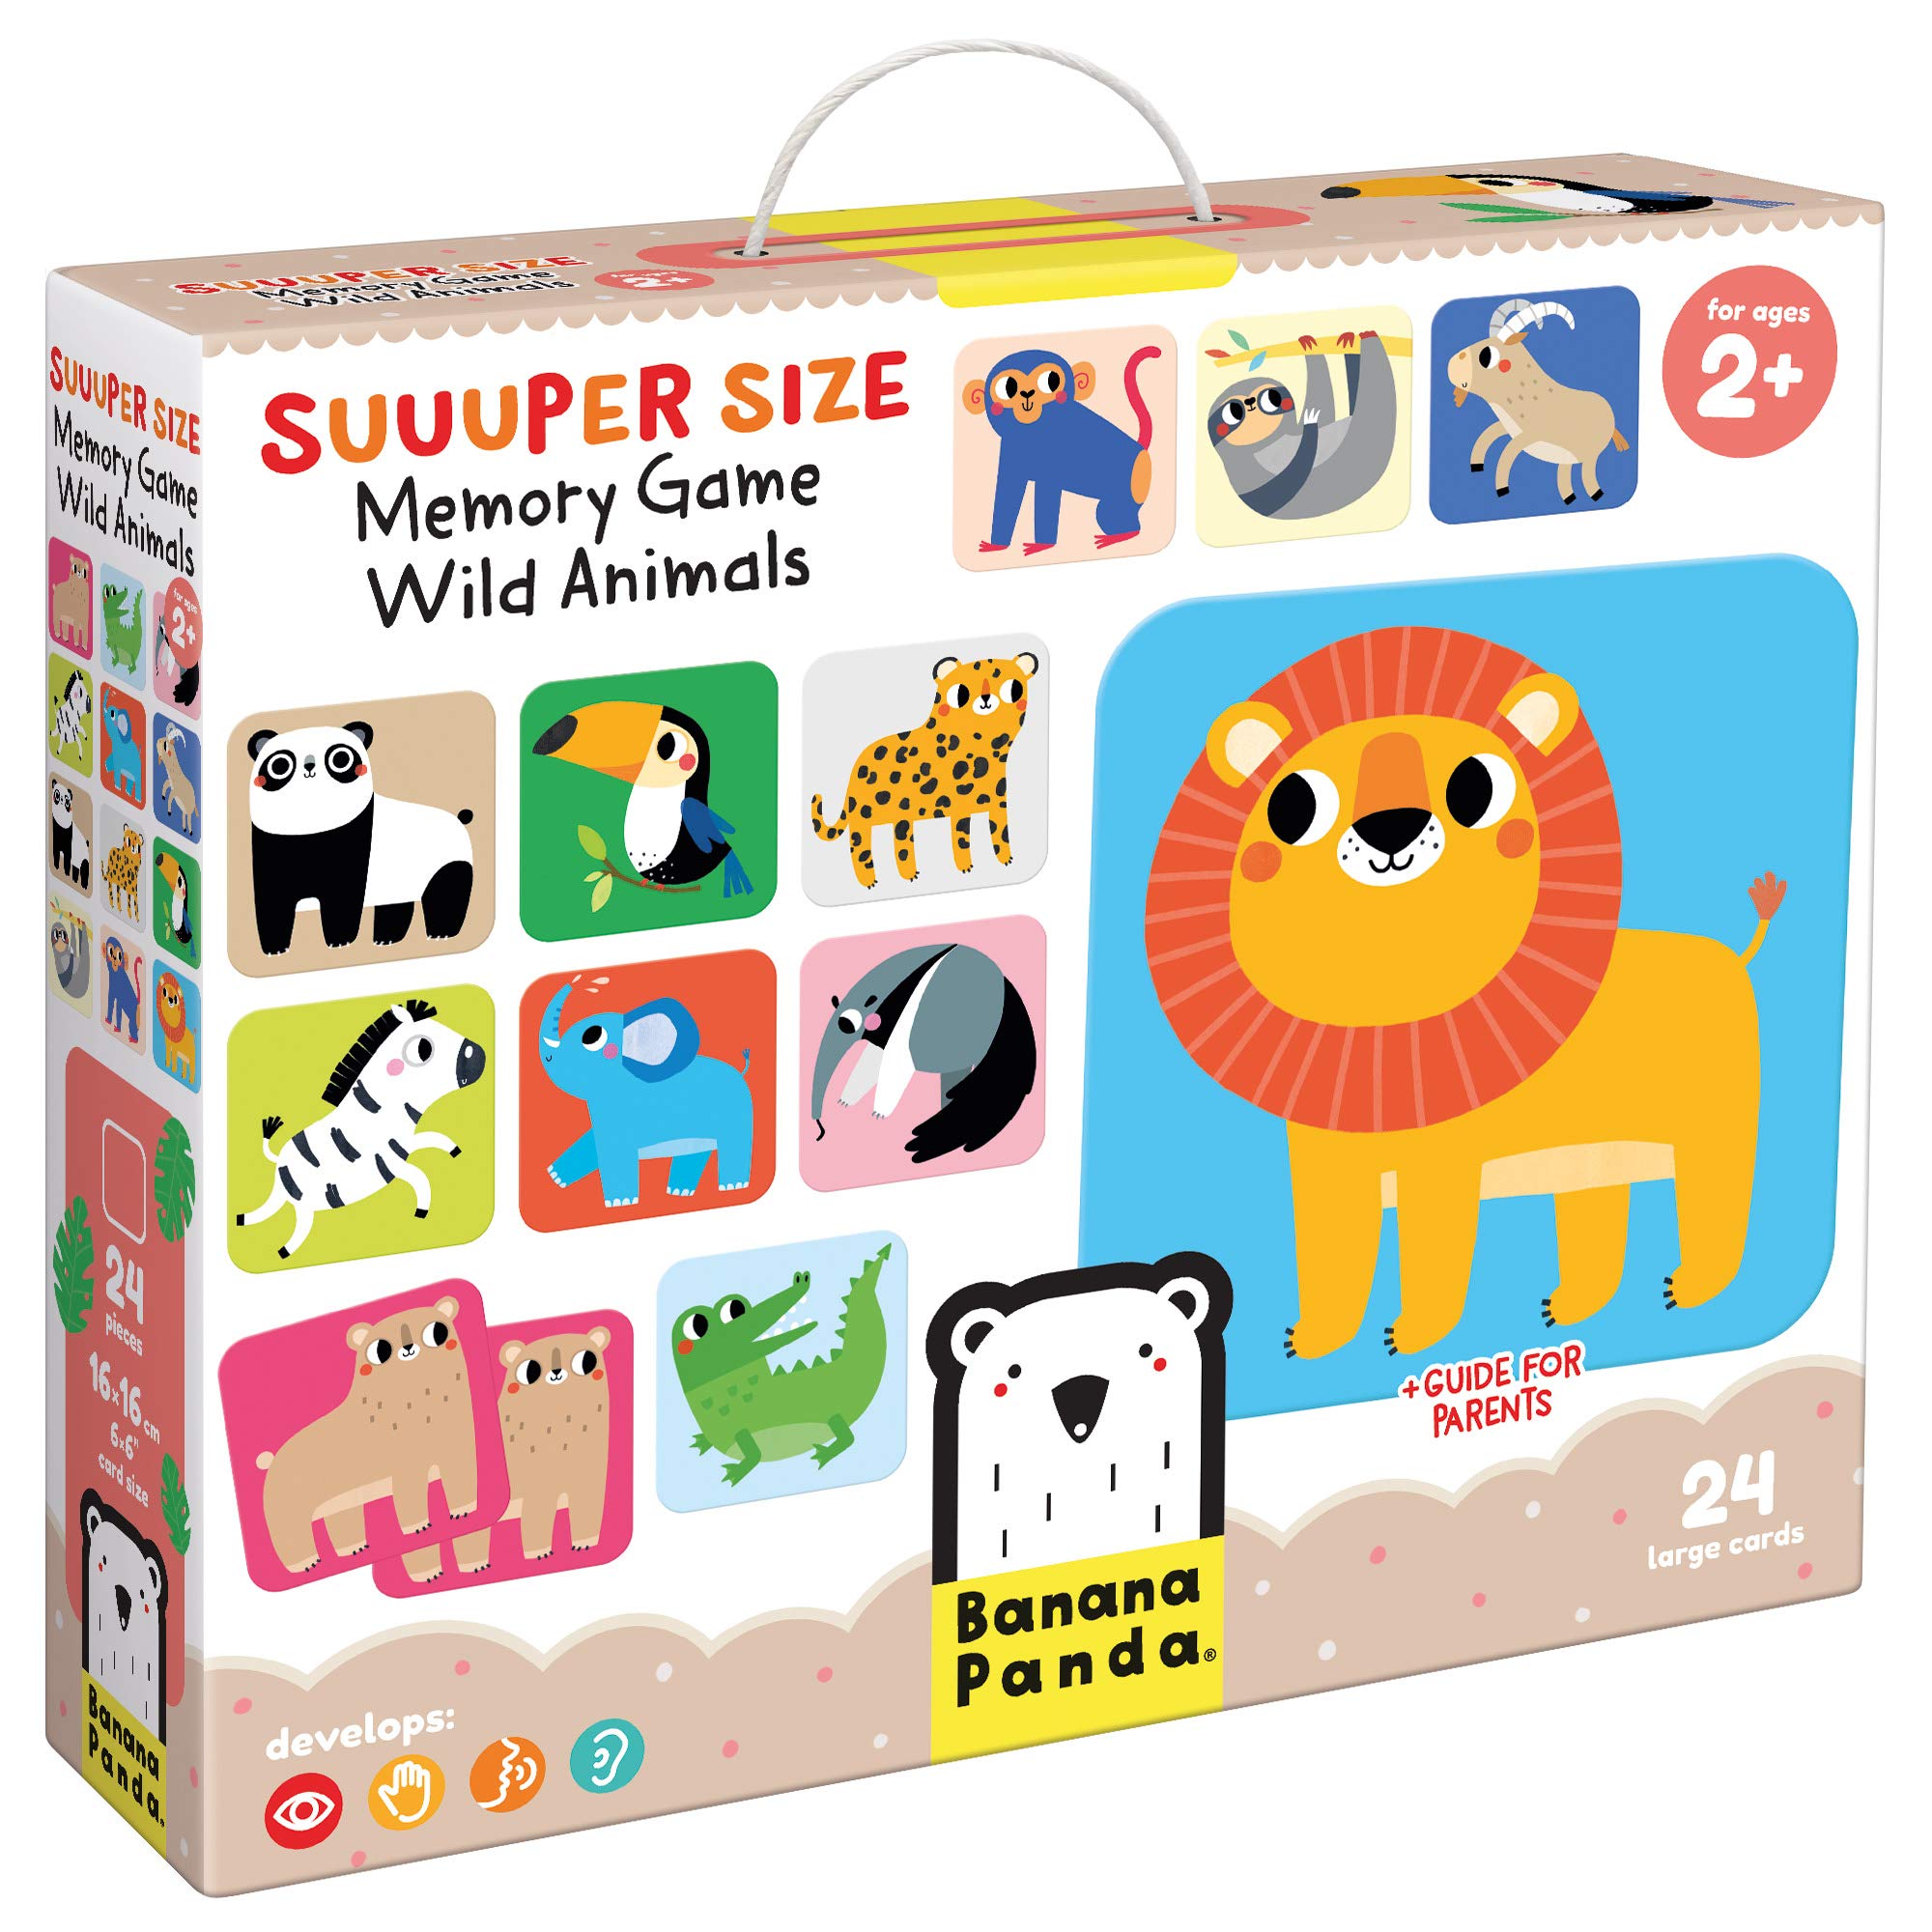 Banana Panda Suuuper Size Memory Game (Wild Animals, 24 Extra-Large Cards) $15.39 + Free Shipping w/ Prime or on orders $35+